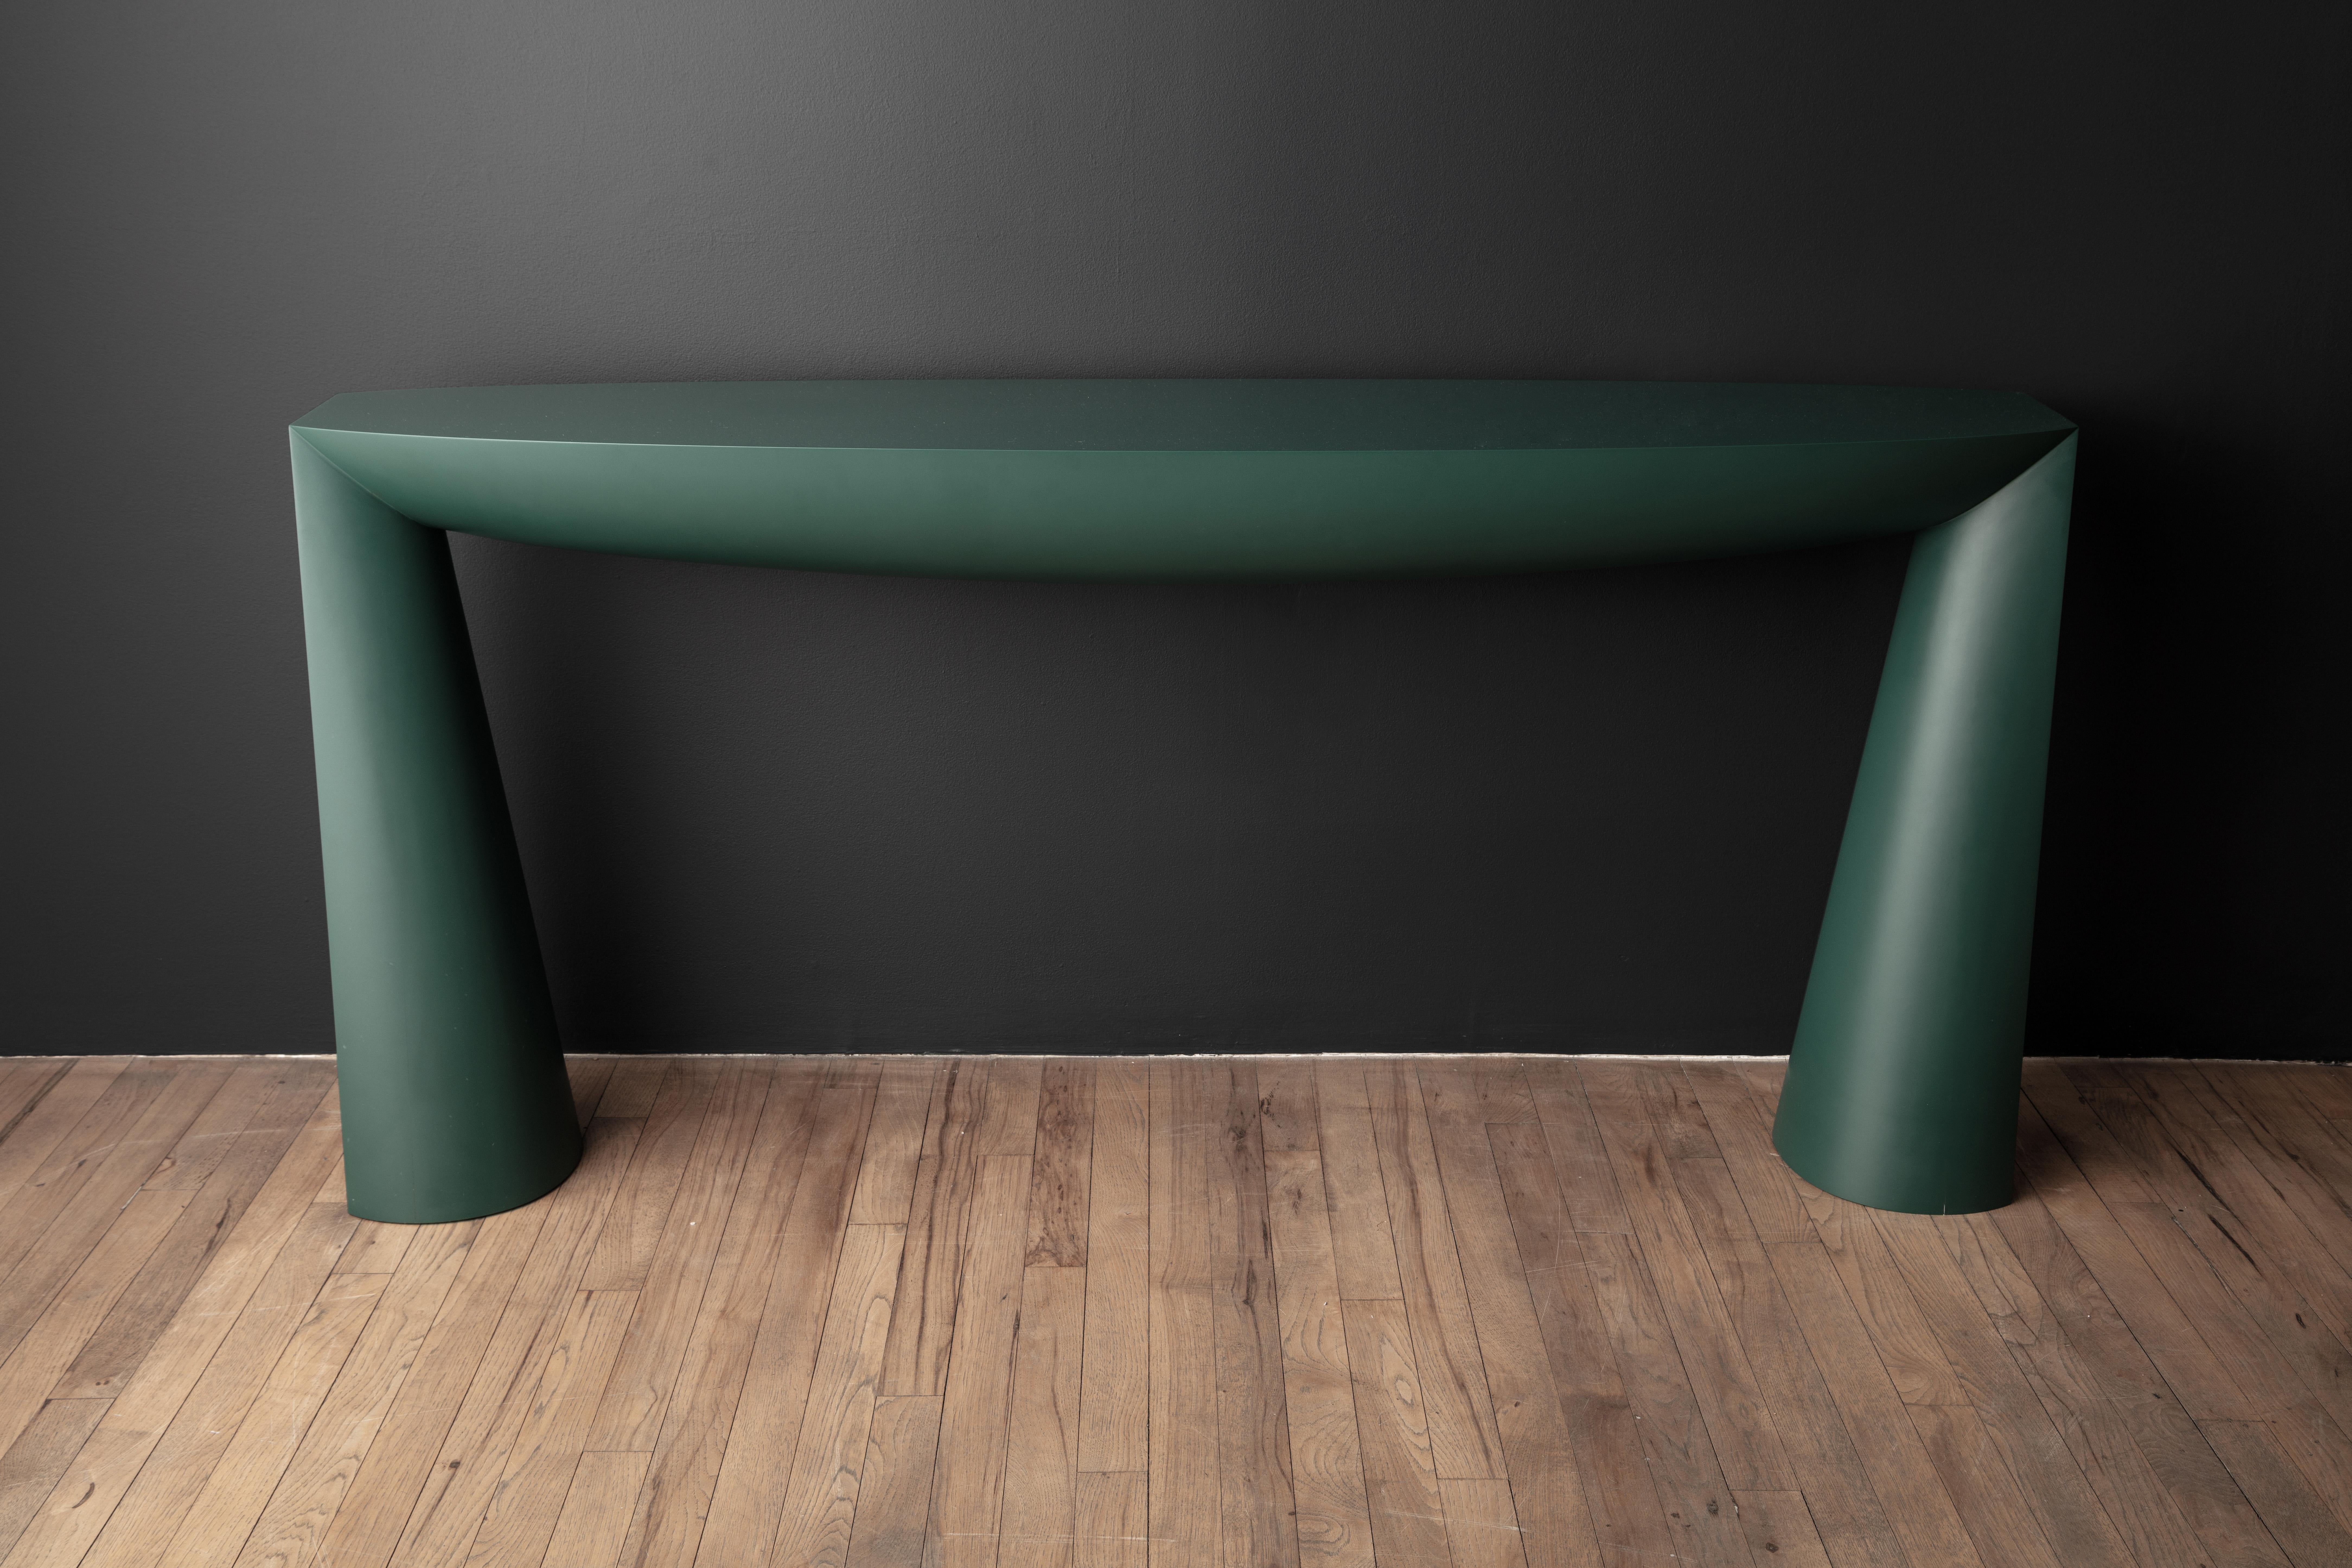 First exhibited at the Galerie Vidid in Rotterdam, the Console table of Aldo Bakker depicts the simplest design concept of a table: two legs and a surface. The legs are an elongation of the line created by the tabletop. The tabletop and the base of